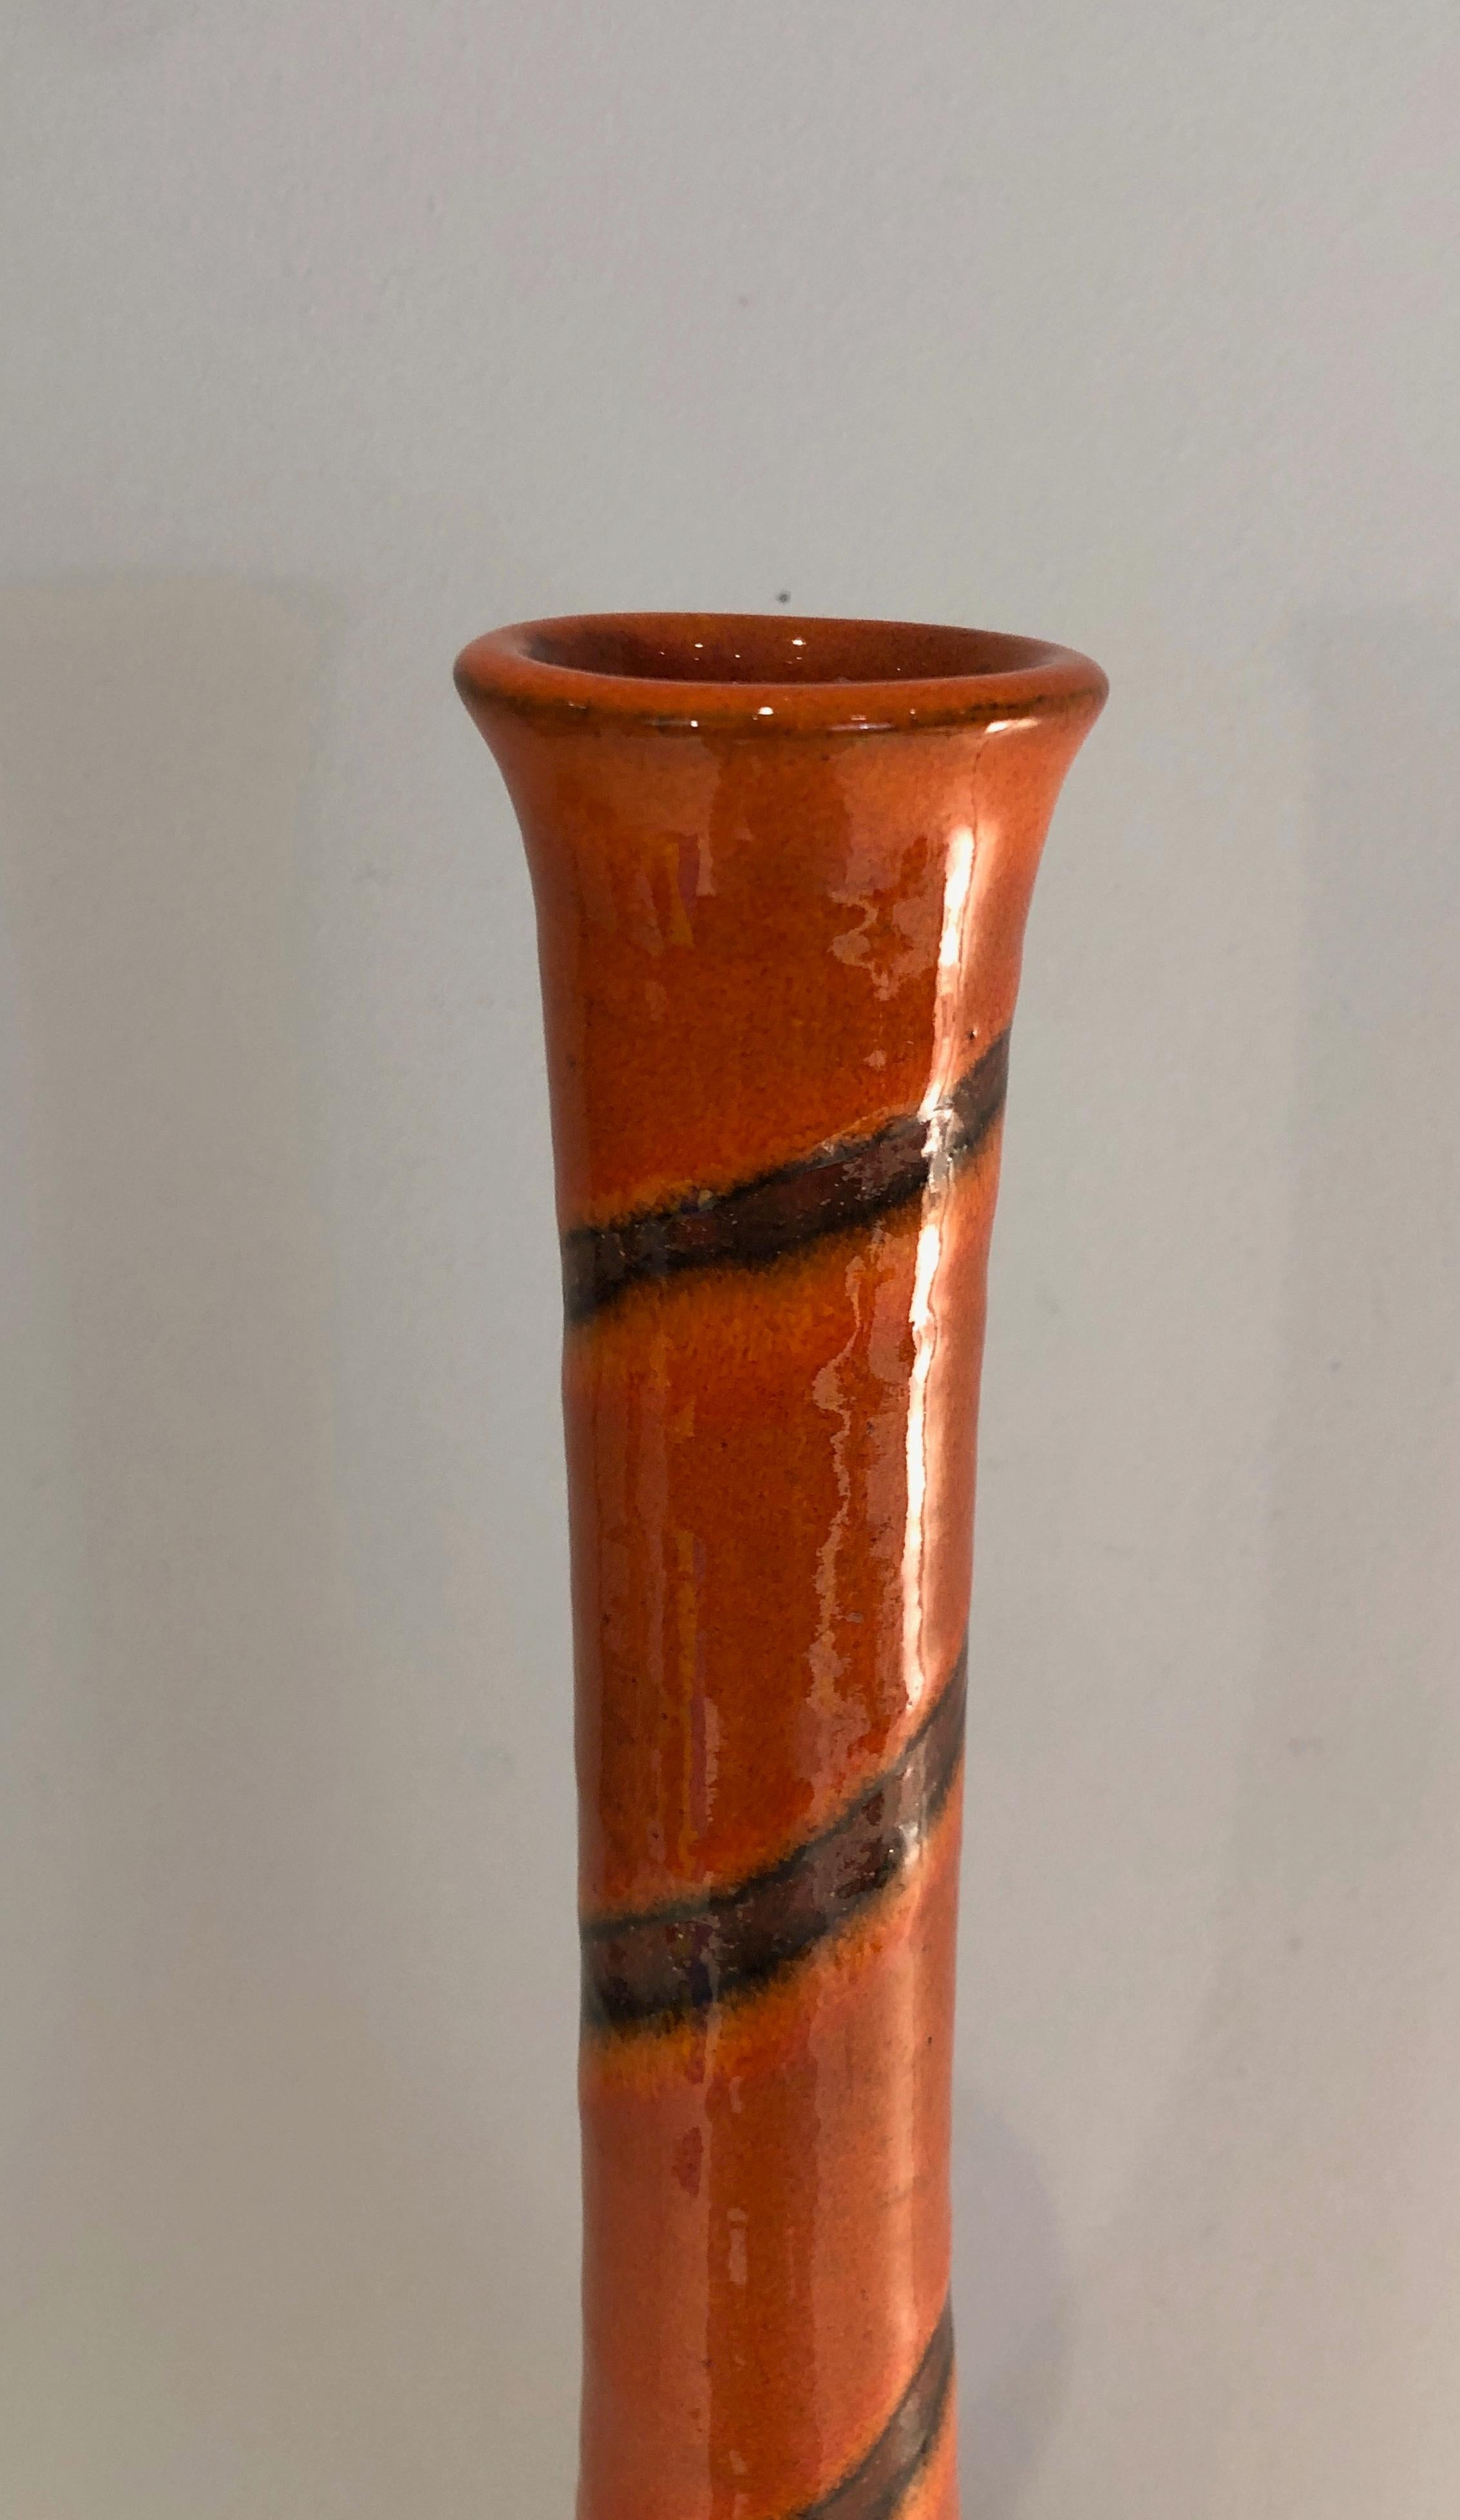 Mid-20th Century Tall Ceramic Vase in the Red-Orange Tones, French Work, Circa 1950 For Sale